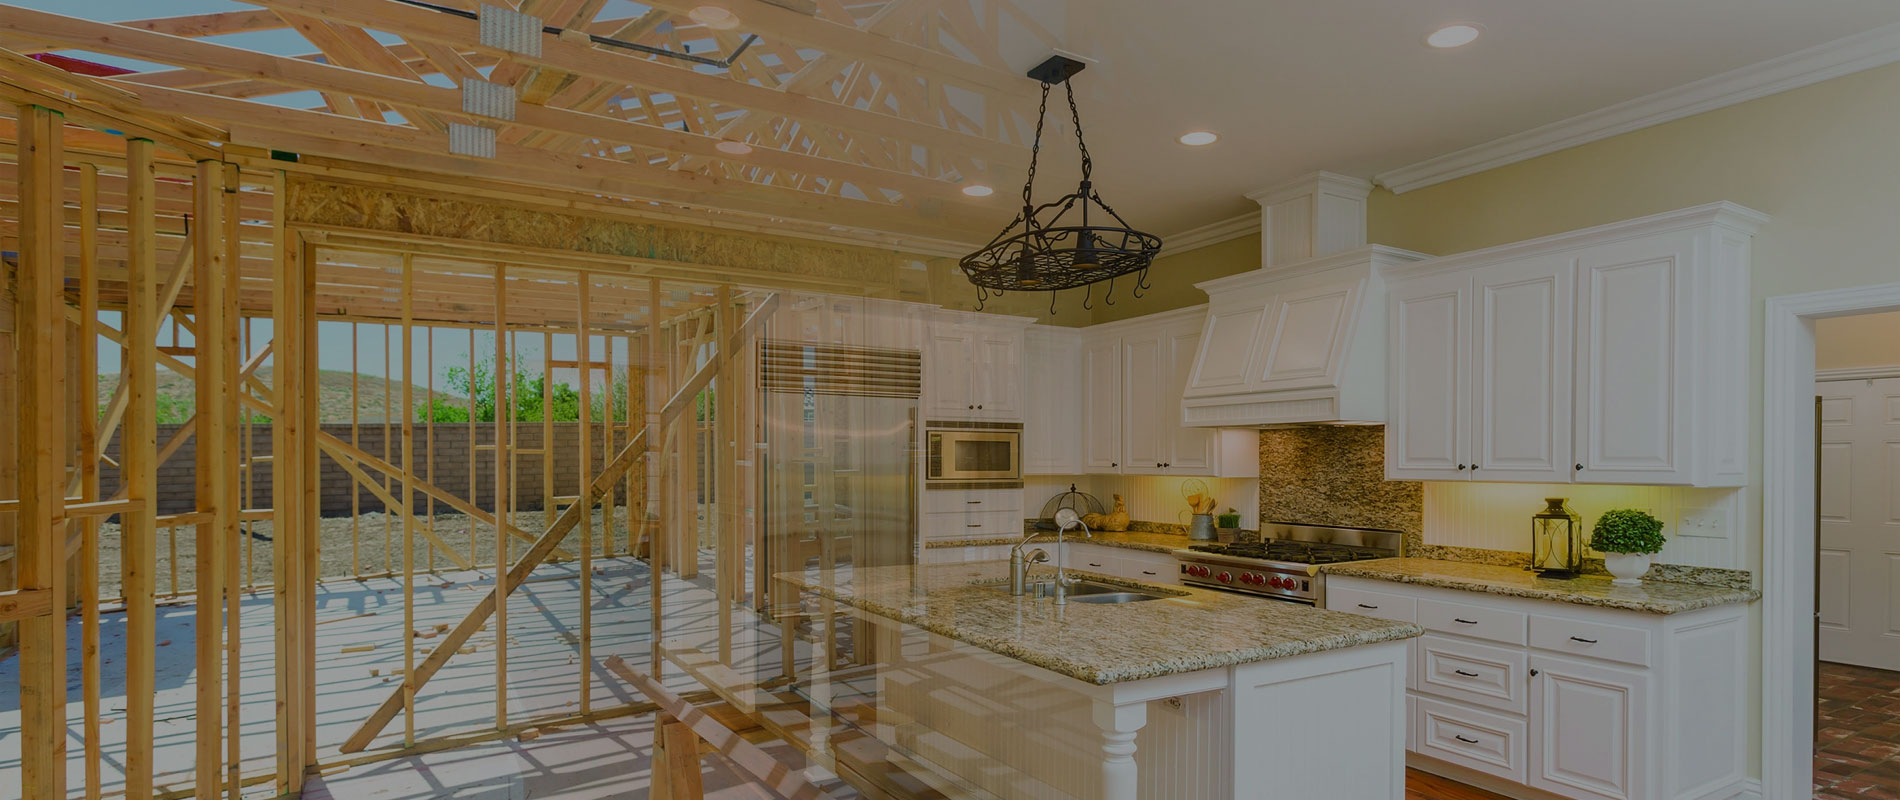 A Vision For You | South Jersey Home Remodeling Contractors